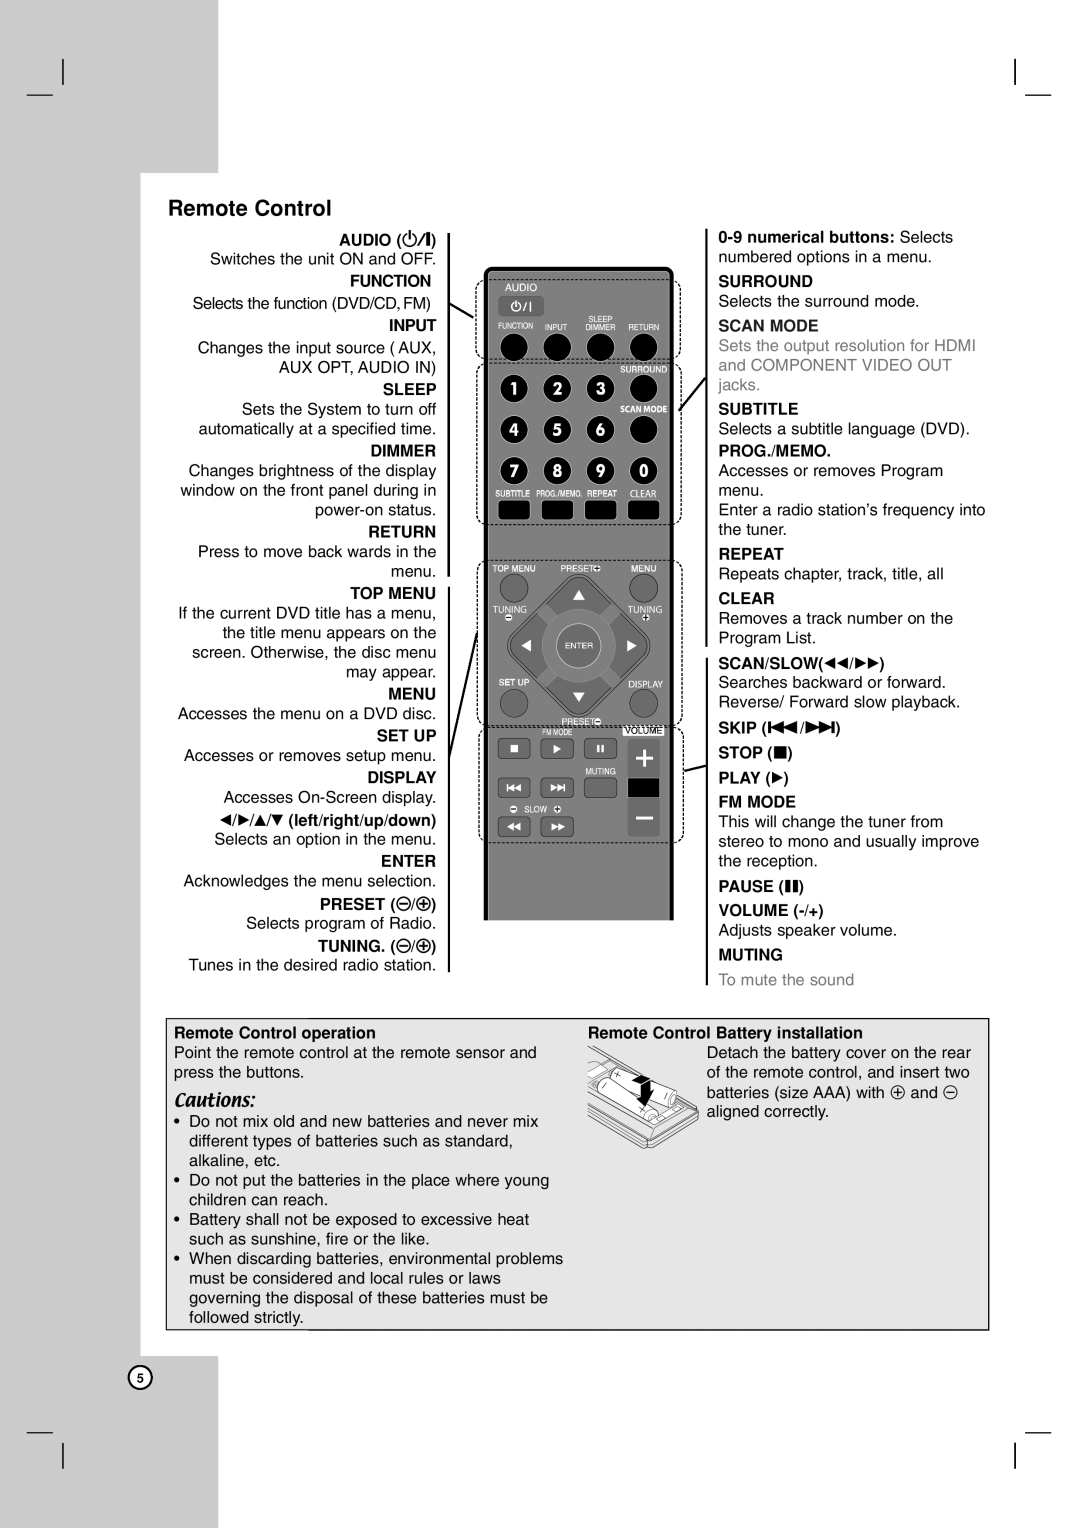 JVC TH-G31 Remote Control, AUDIO 1/ Switches the unit ON and OFF FUNCTION, Input, Top Menu, Surround, Scan Mode, Subtitle 